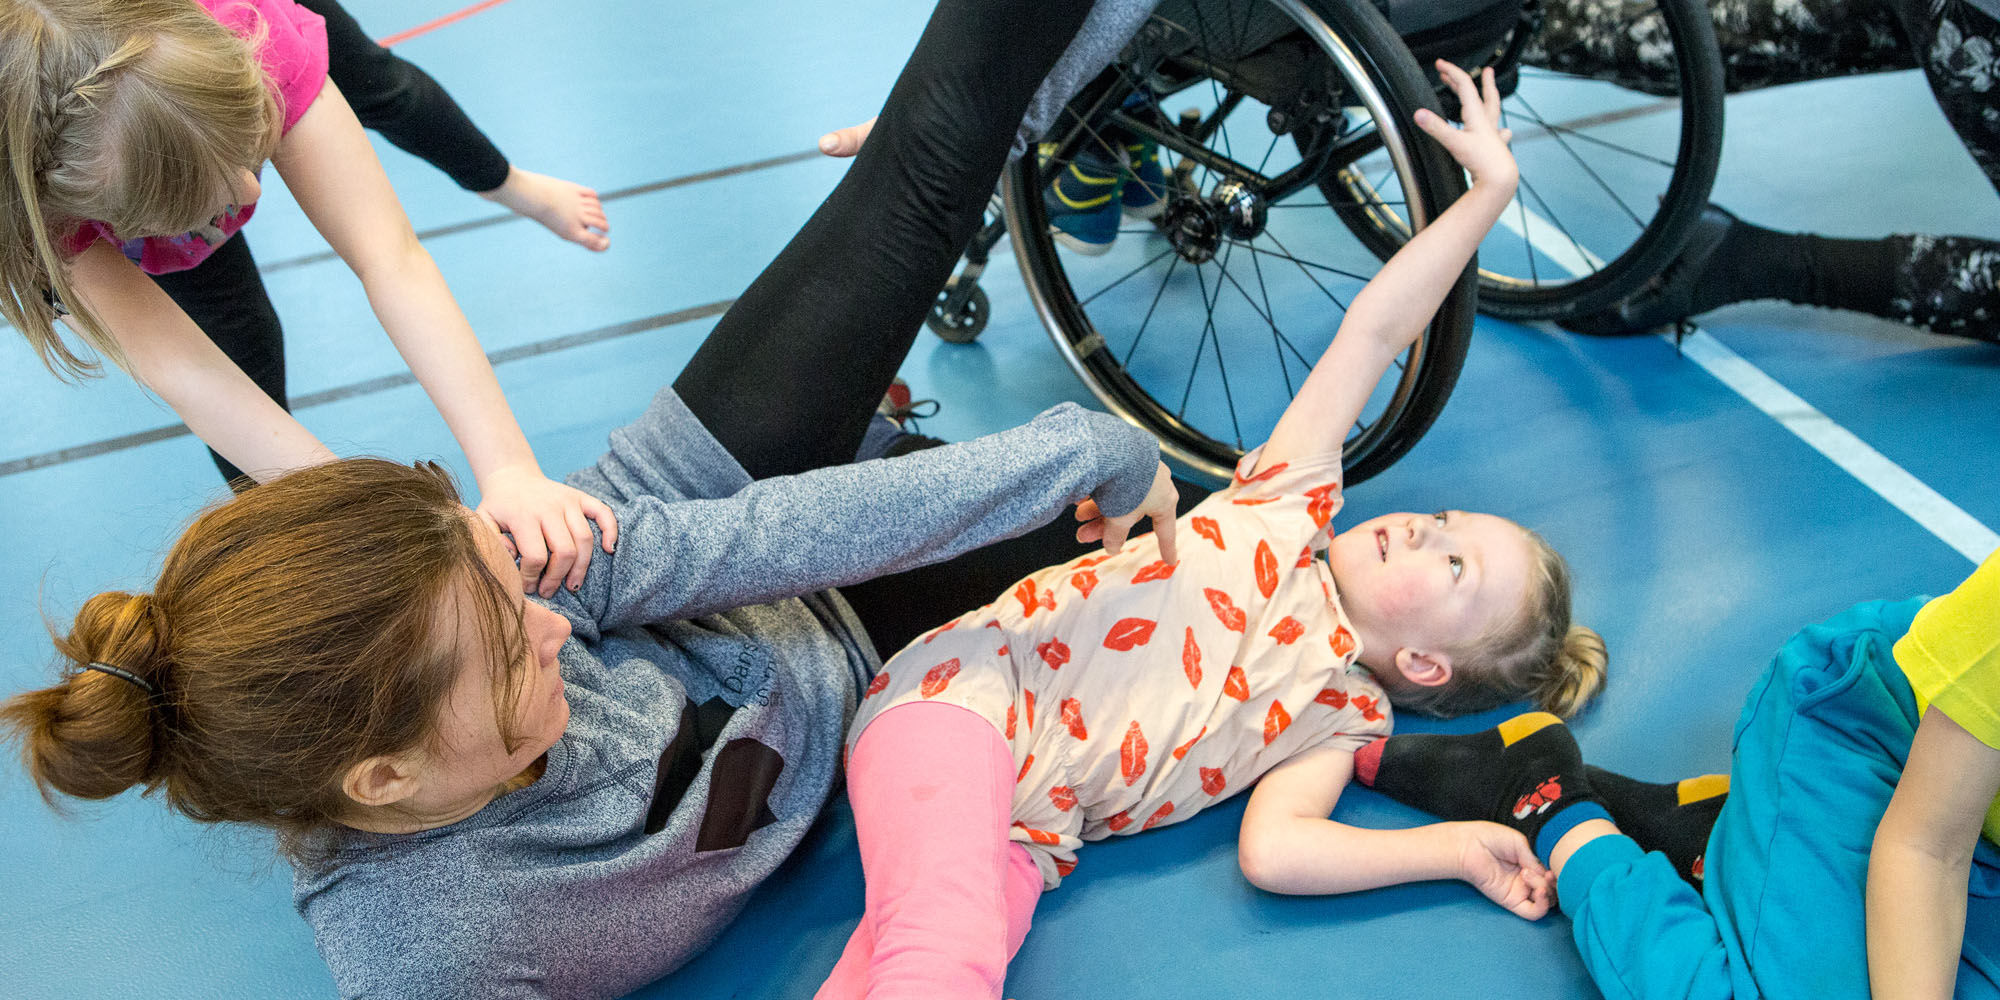 Image from dance workshop for children together with dancers from Spinn. Photo: Maja Blomqvist